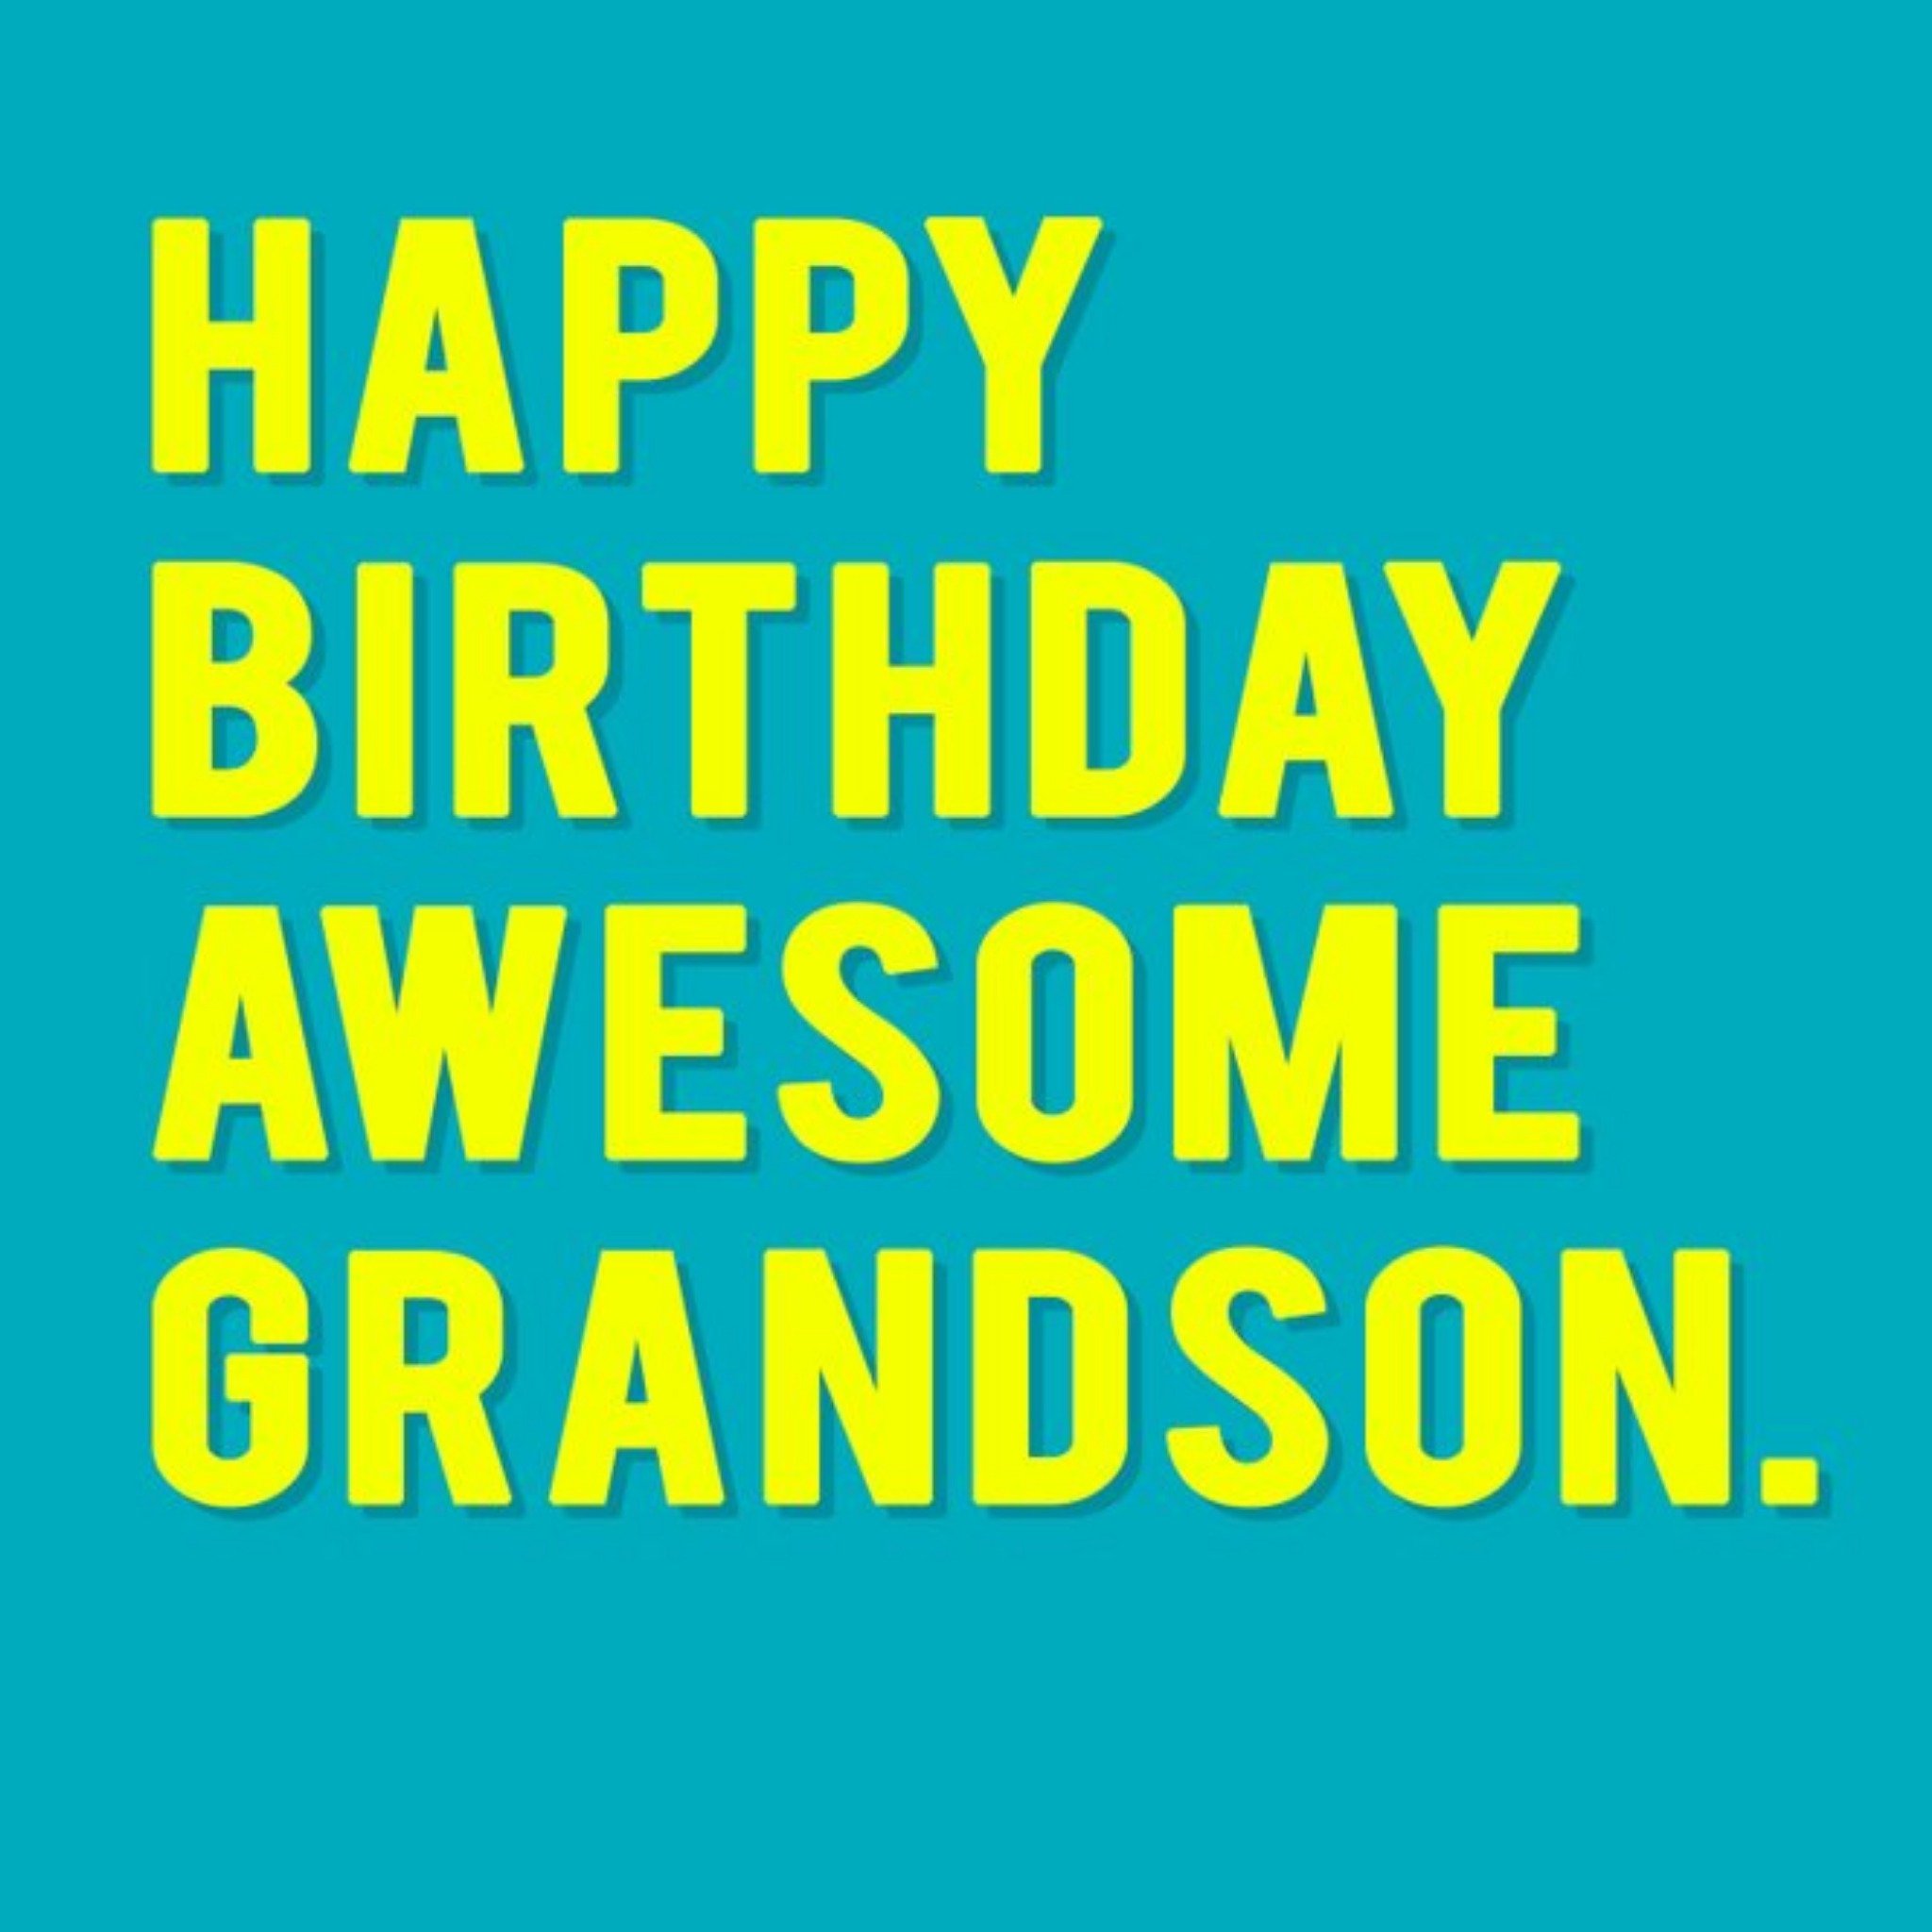 Moonpig Modern Typographical Happy Birthday Awesome Grandson Card, Large